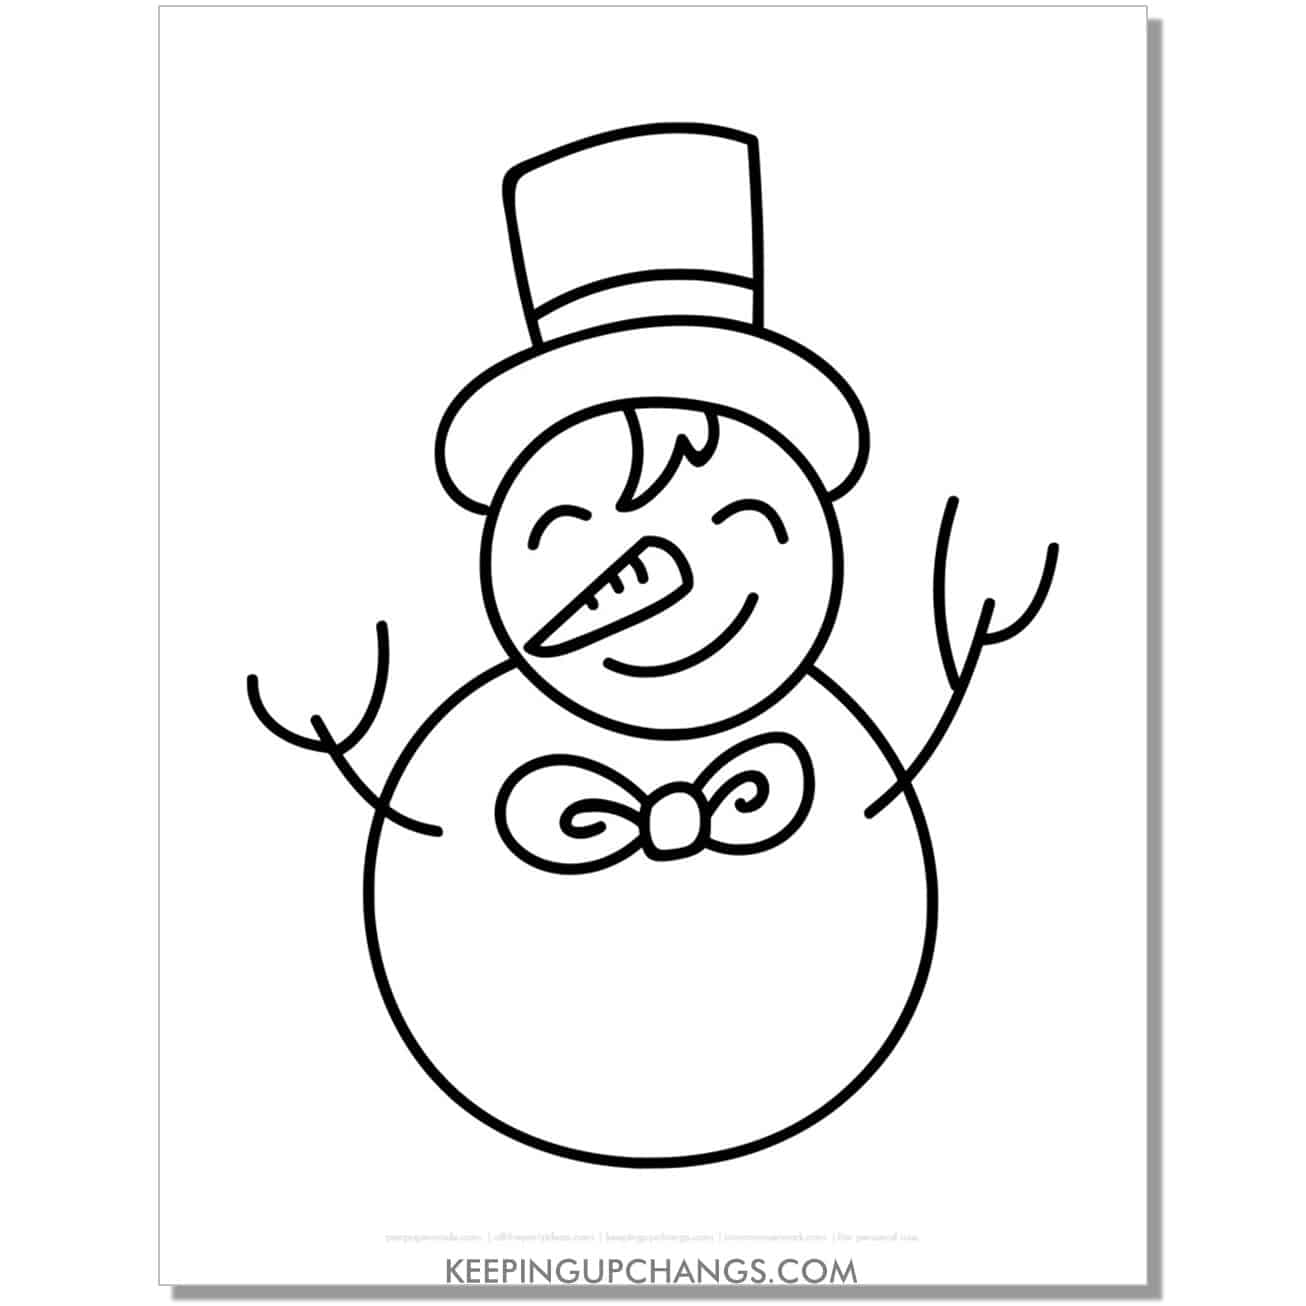 free snowman with top hat, bowtie drawing coloring page.